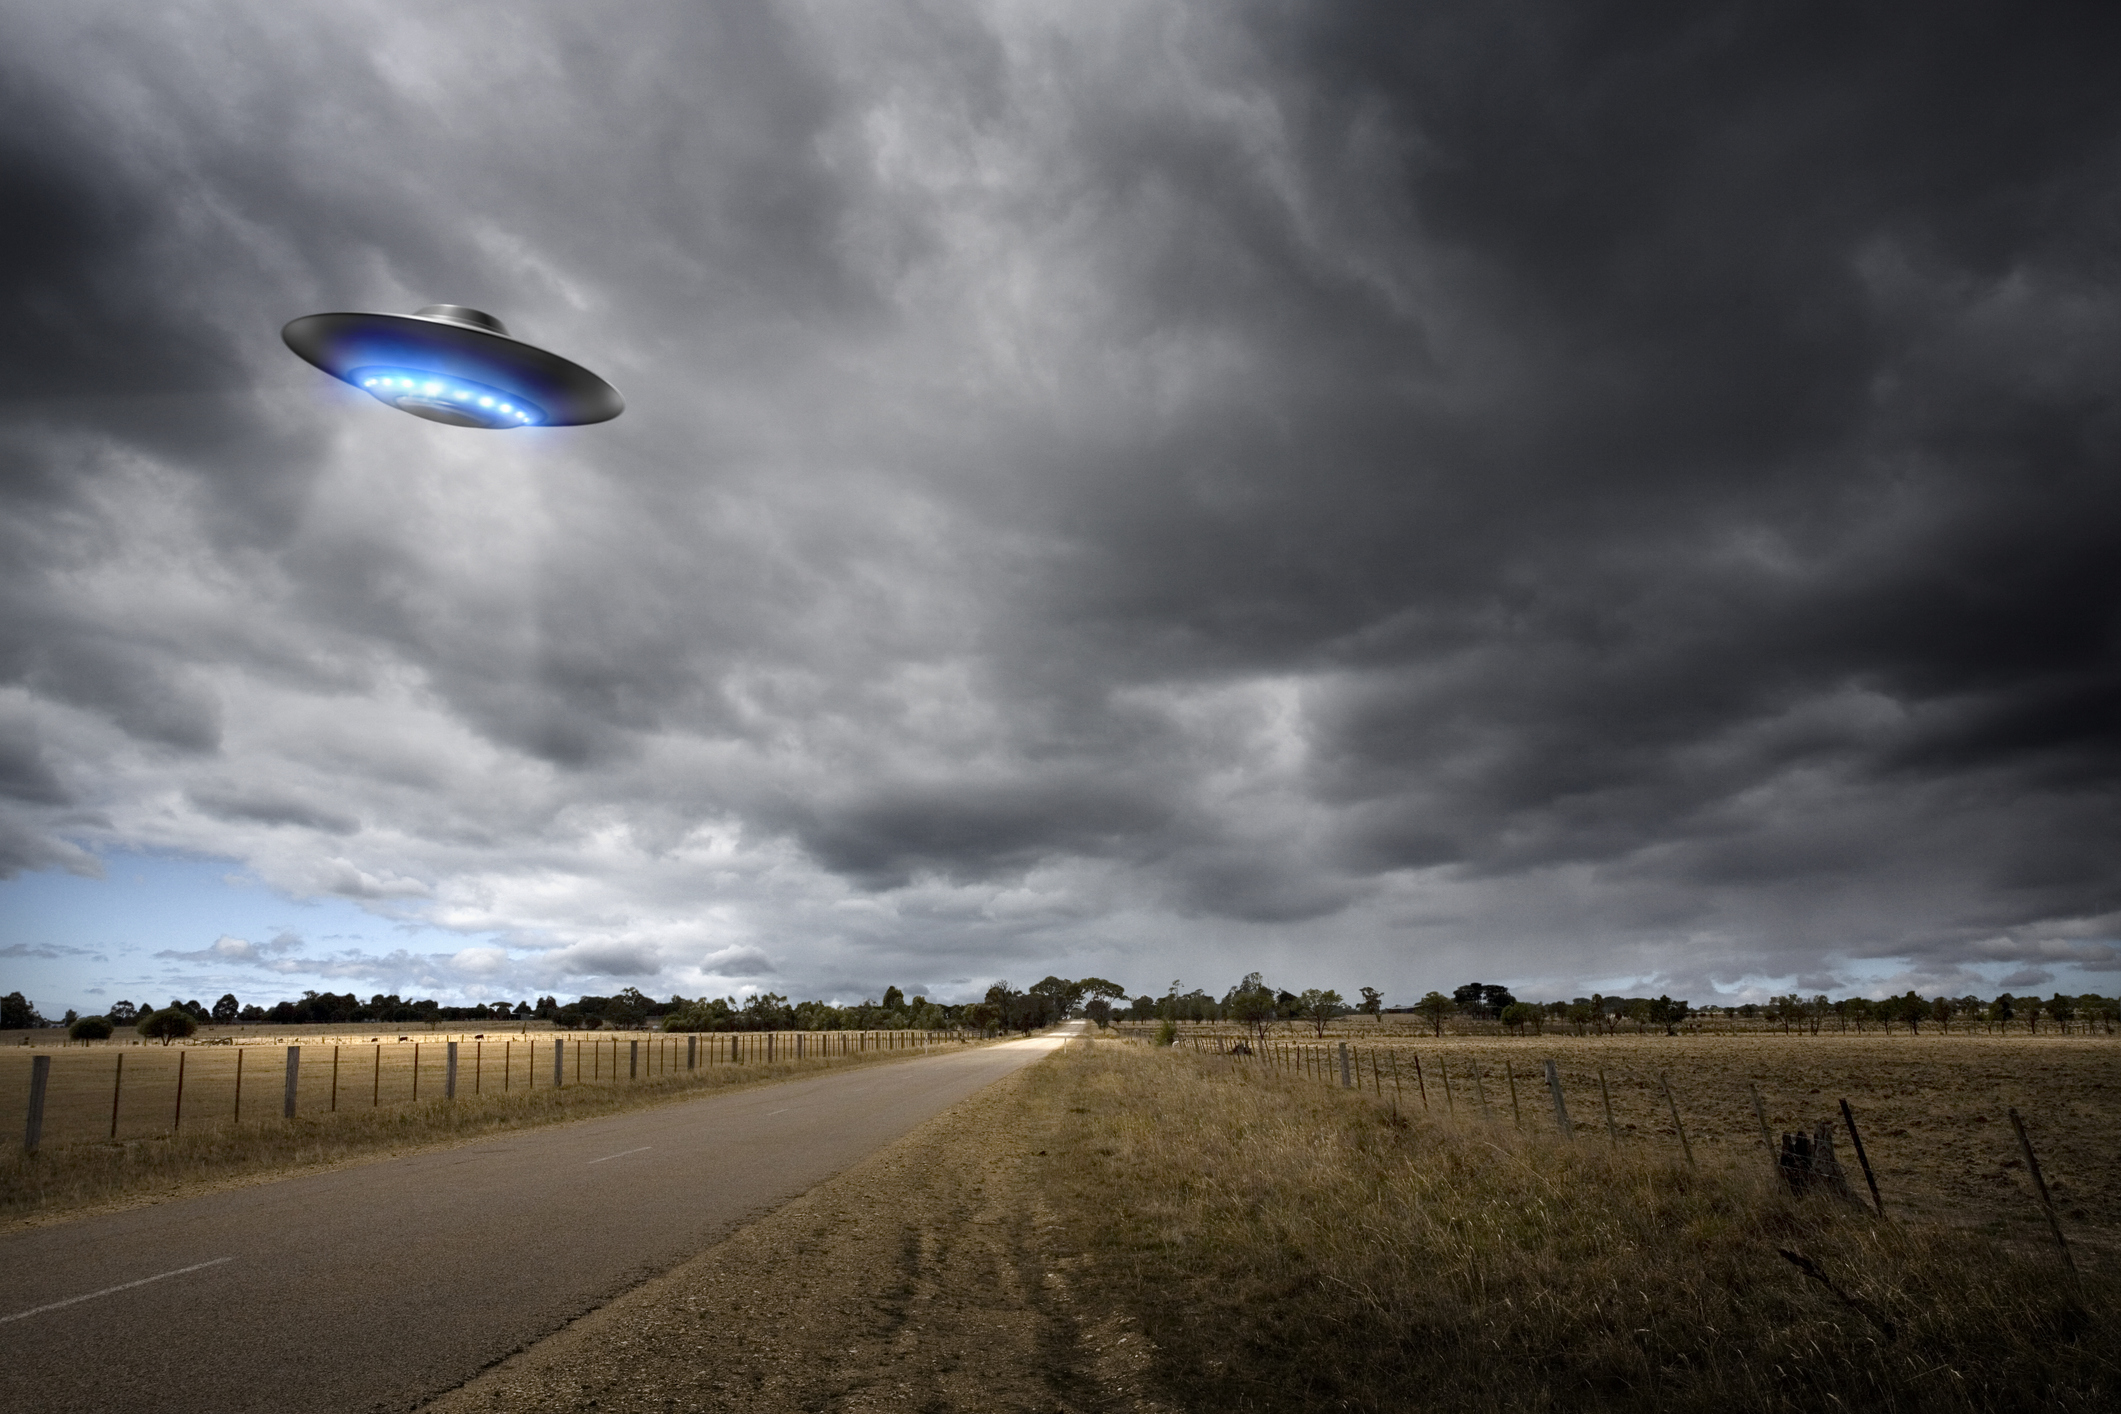 An illustration of a UFO hovering over a grassy field and road.